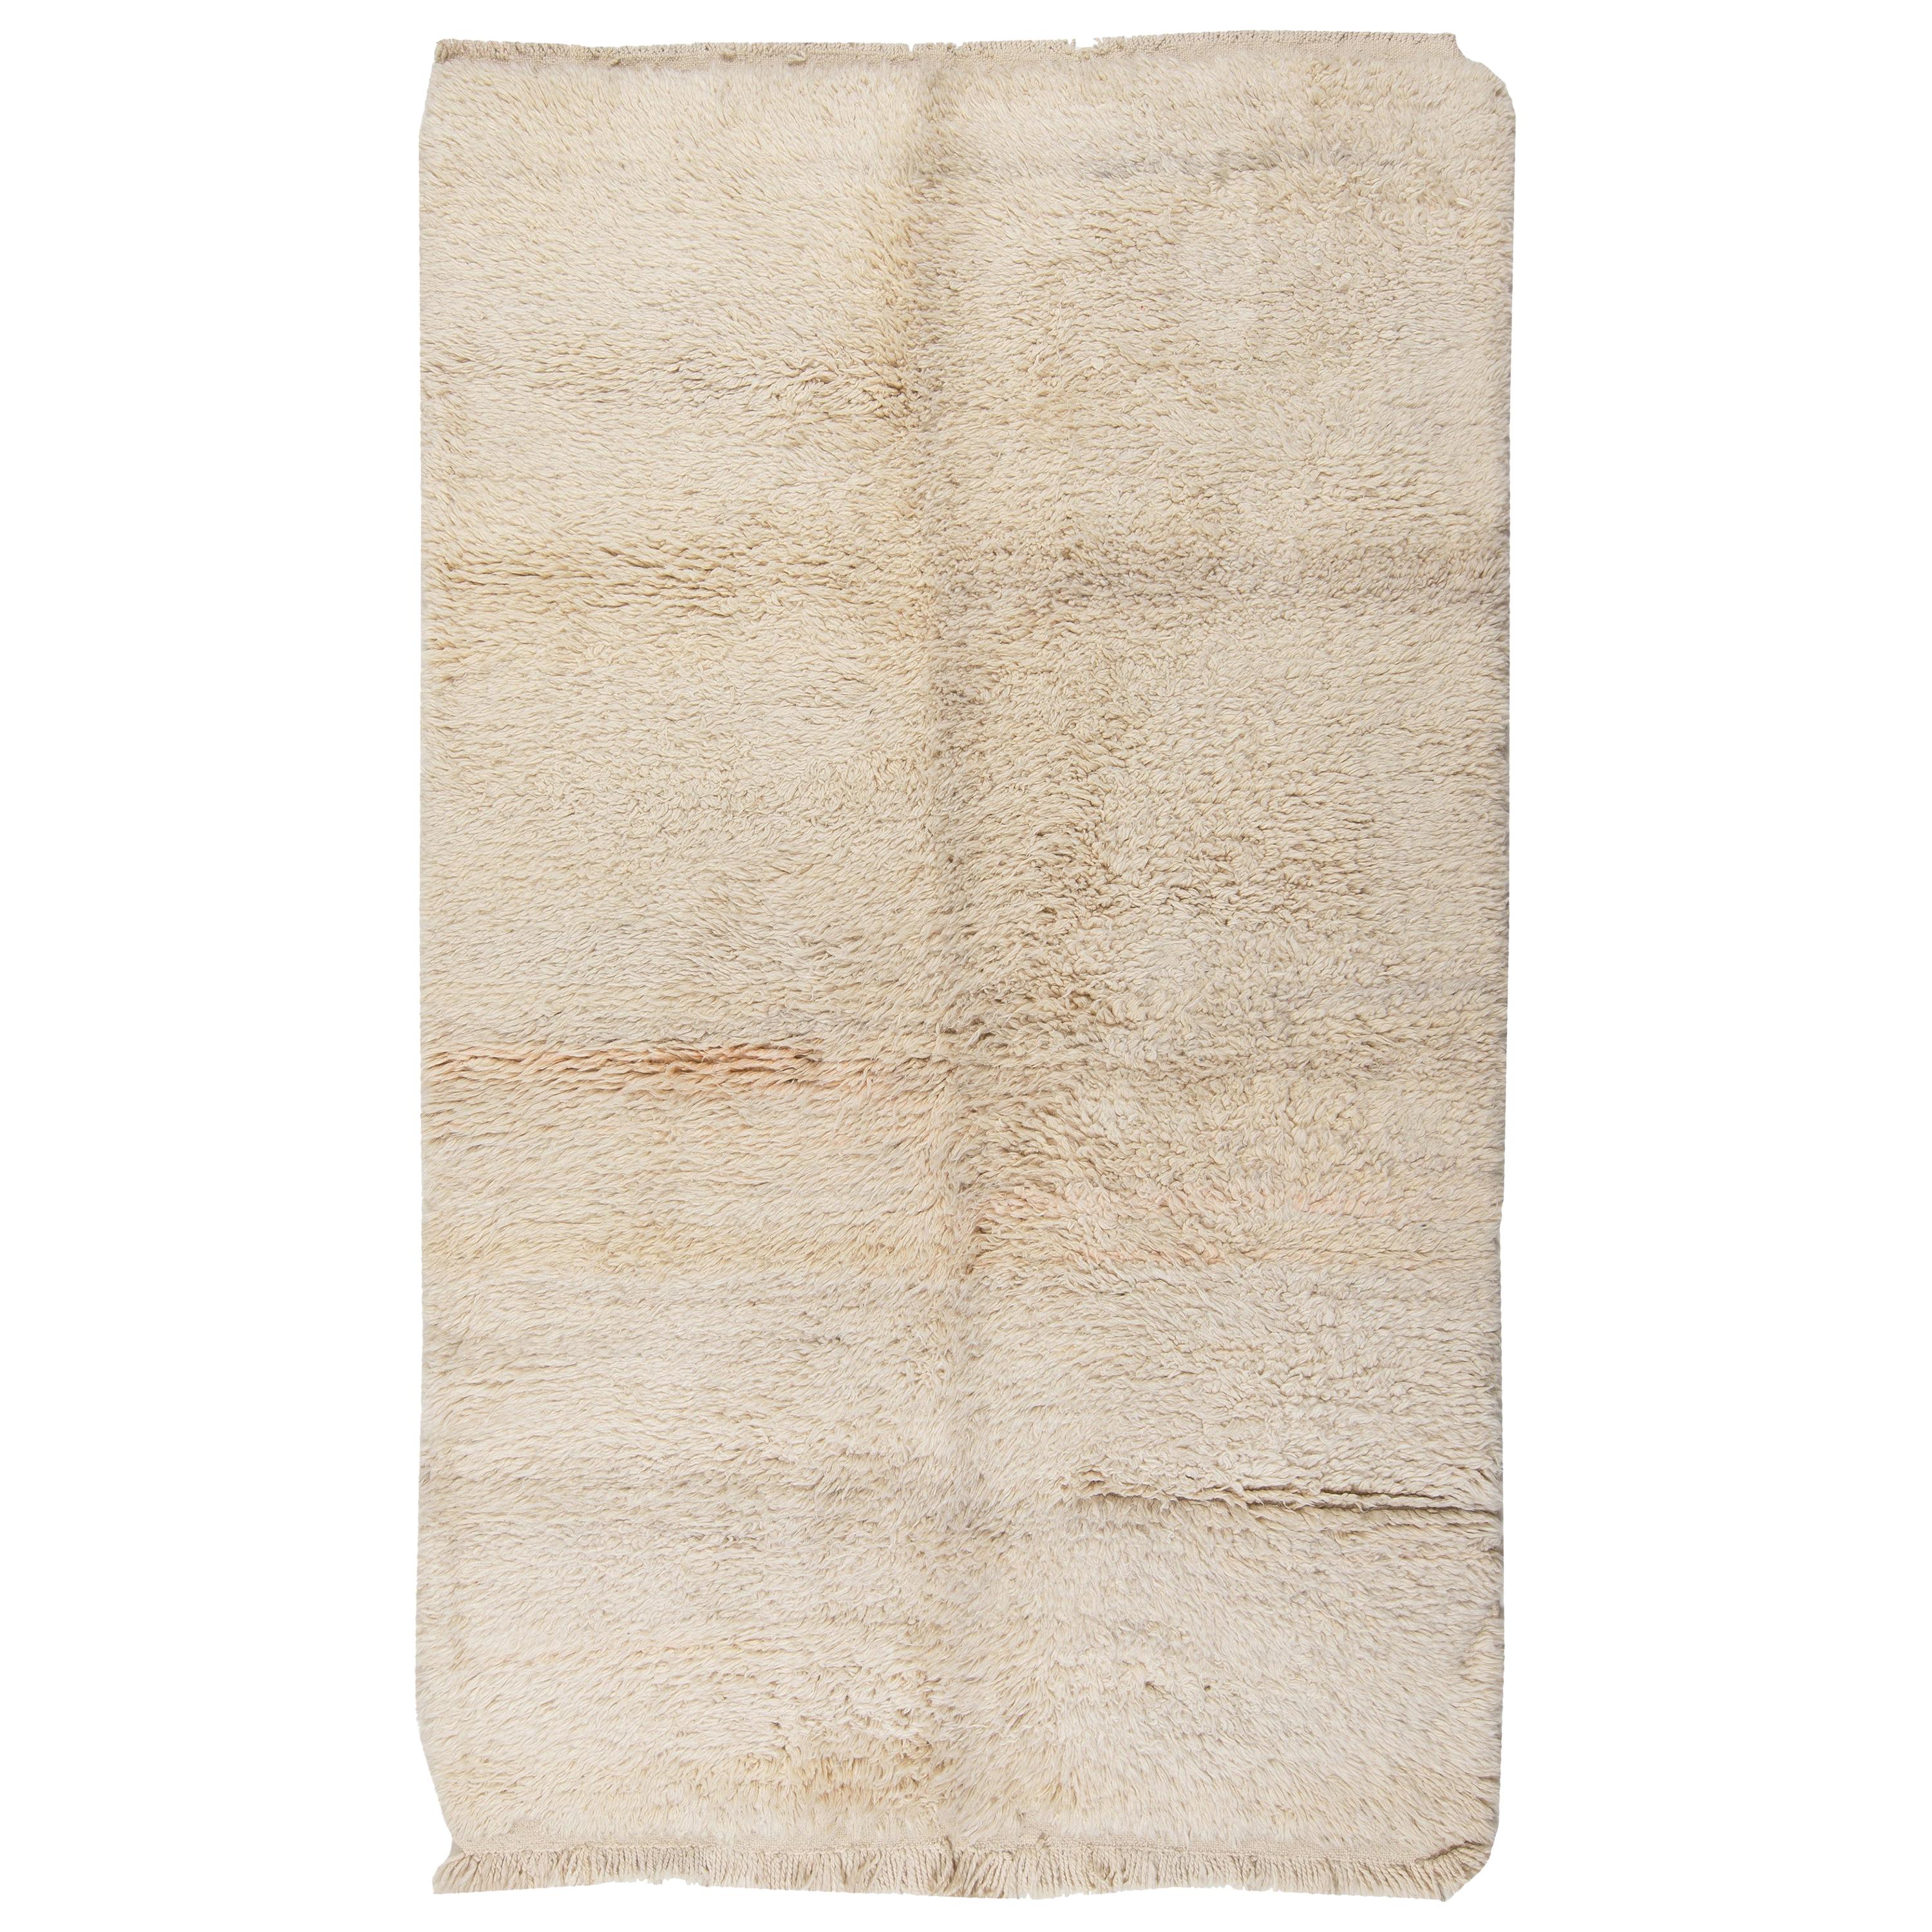 4.7x7.6 Ft Plain Ivory Central Anatolian "Tulu" Rug made of Natural Undyed Wool For Sale